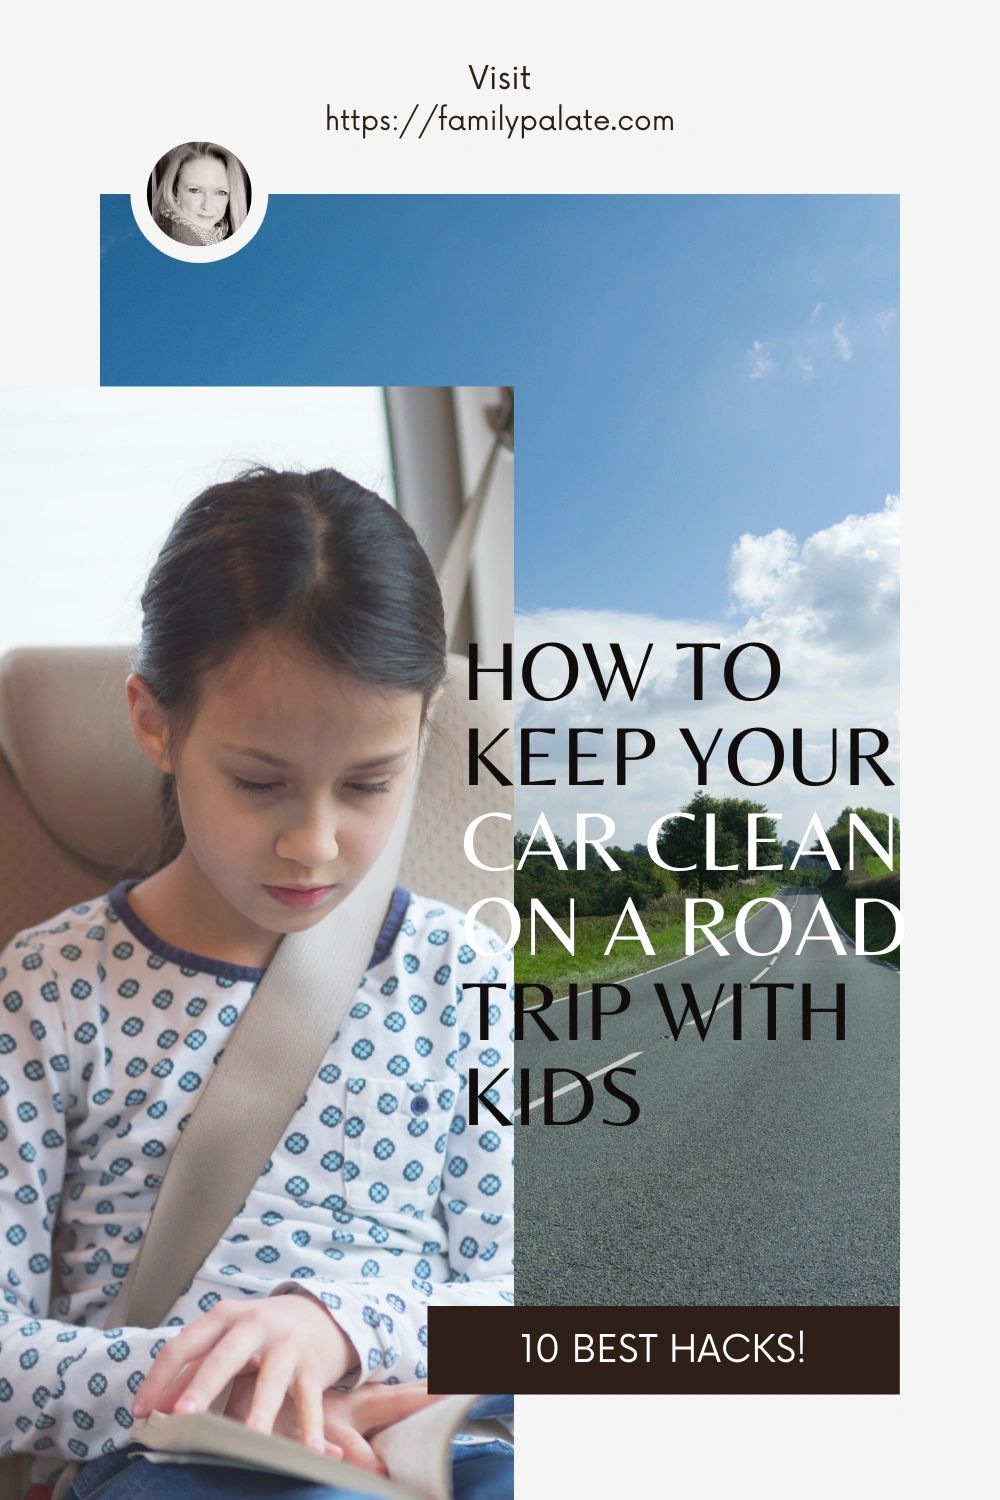 10 Car Hacks To Help Keep The Car Clean With Kids